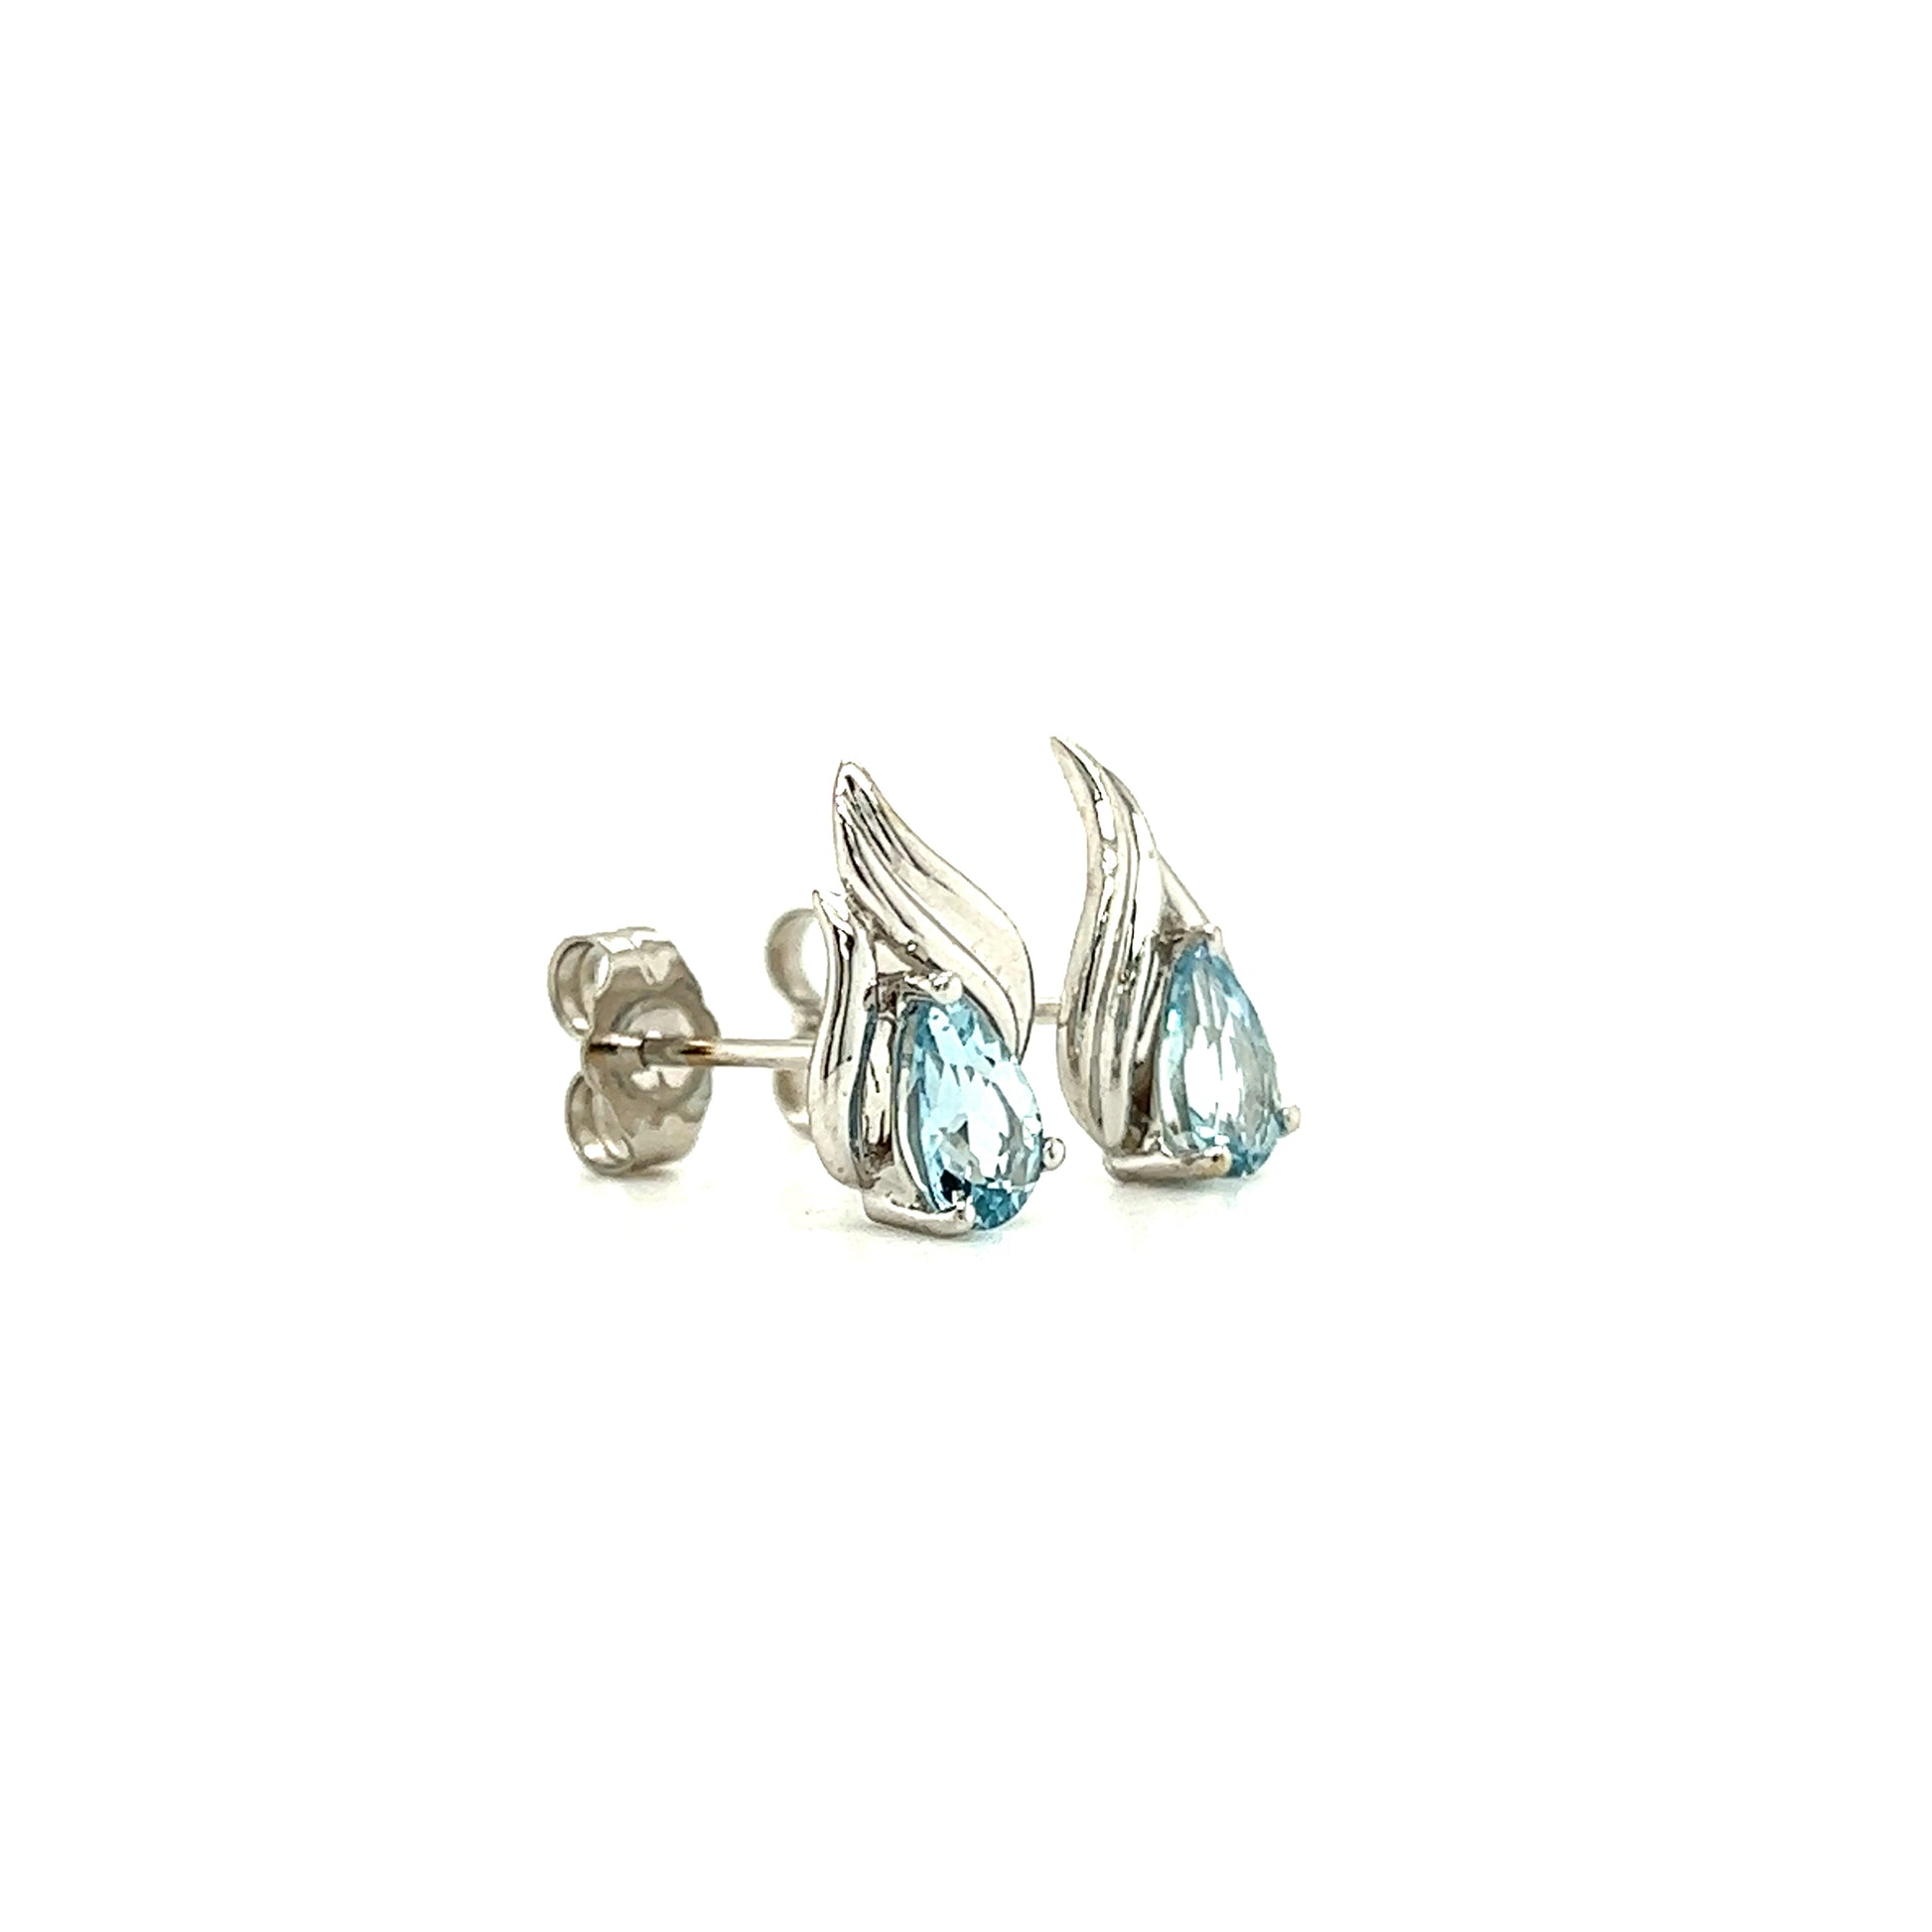 Pear Aquamarine Stud with Flame Motifs Earrings in 14K White Gold Left Side View